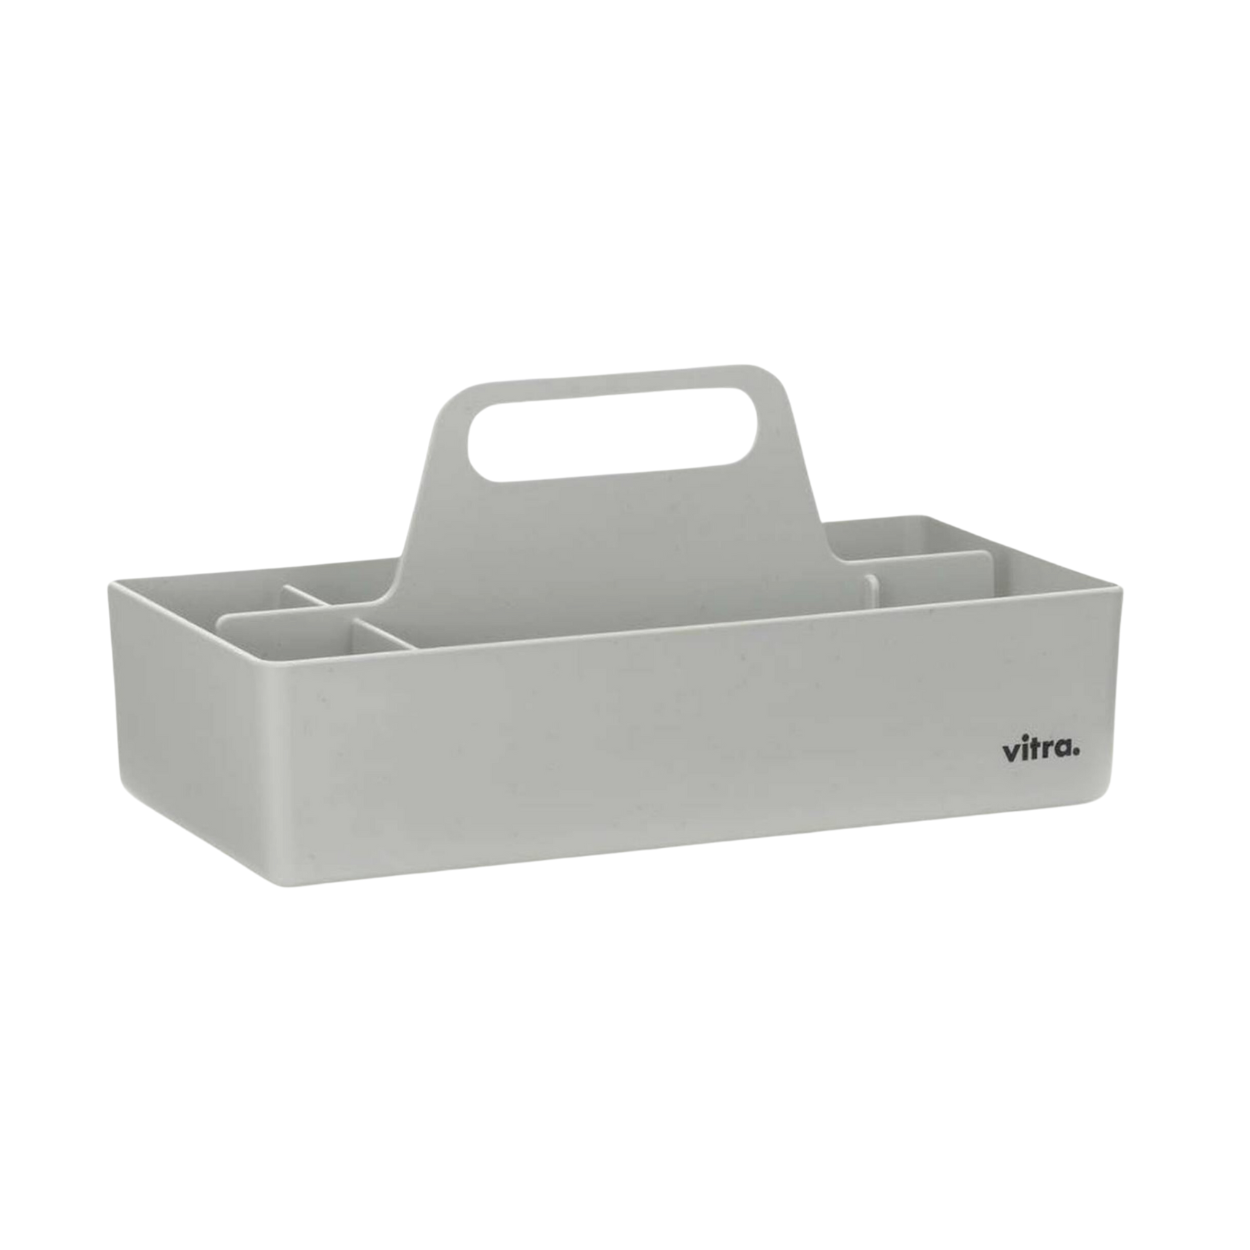 VITRA Toolbox Recyclable material Sustainable RE